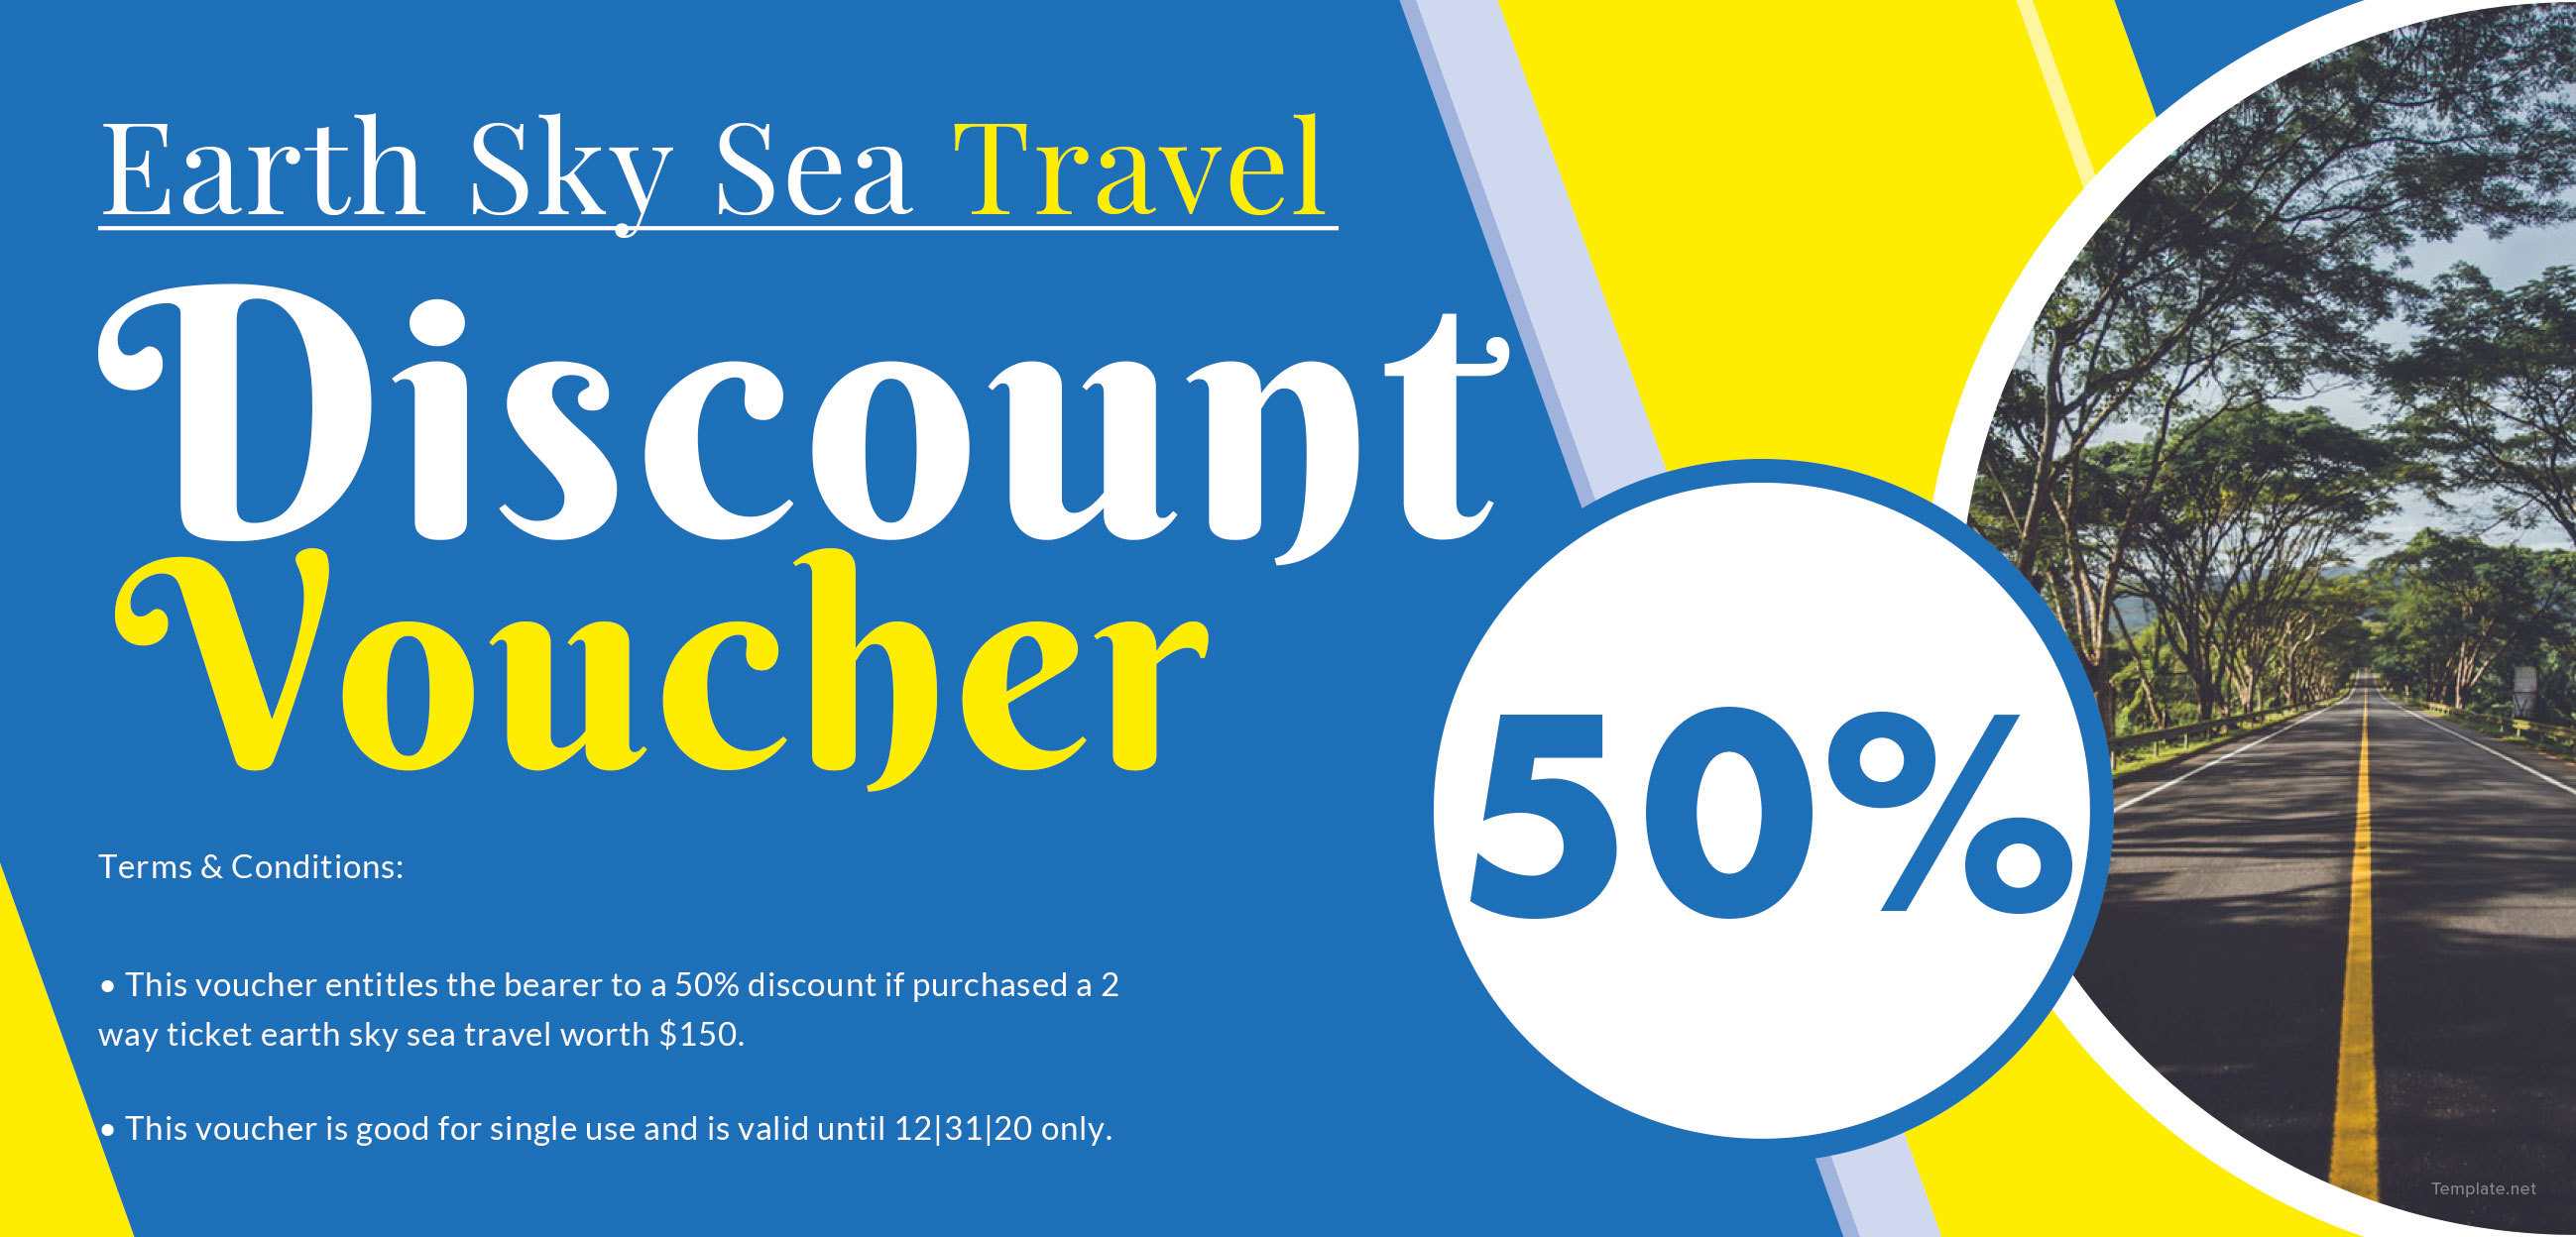 business travel discounts